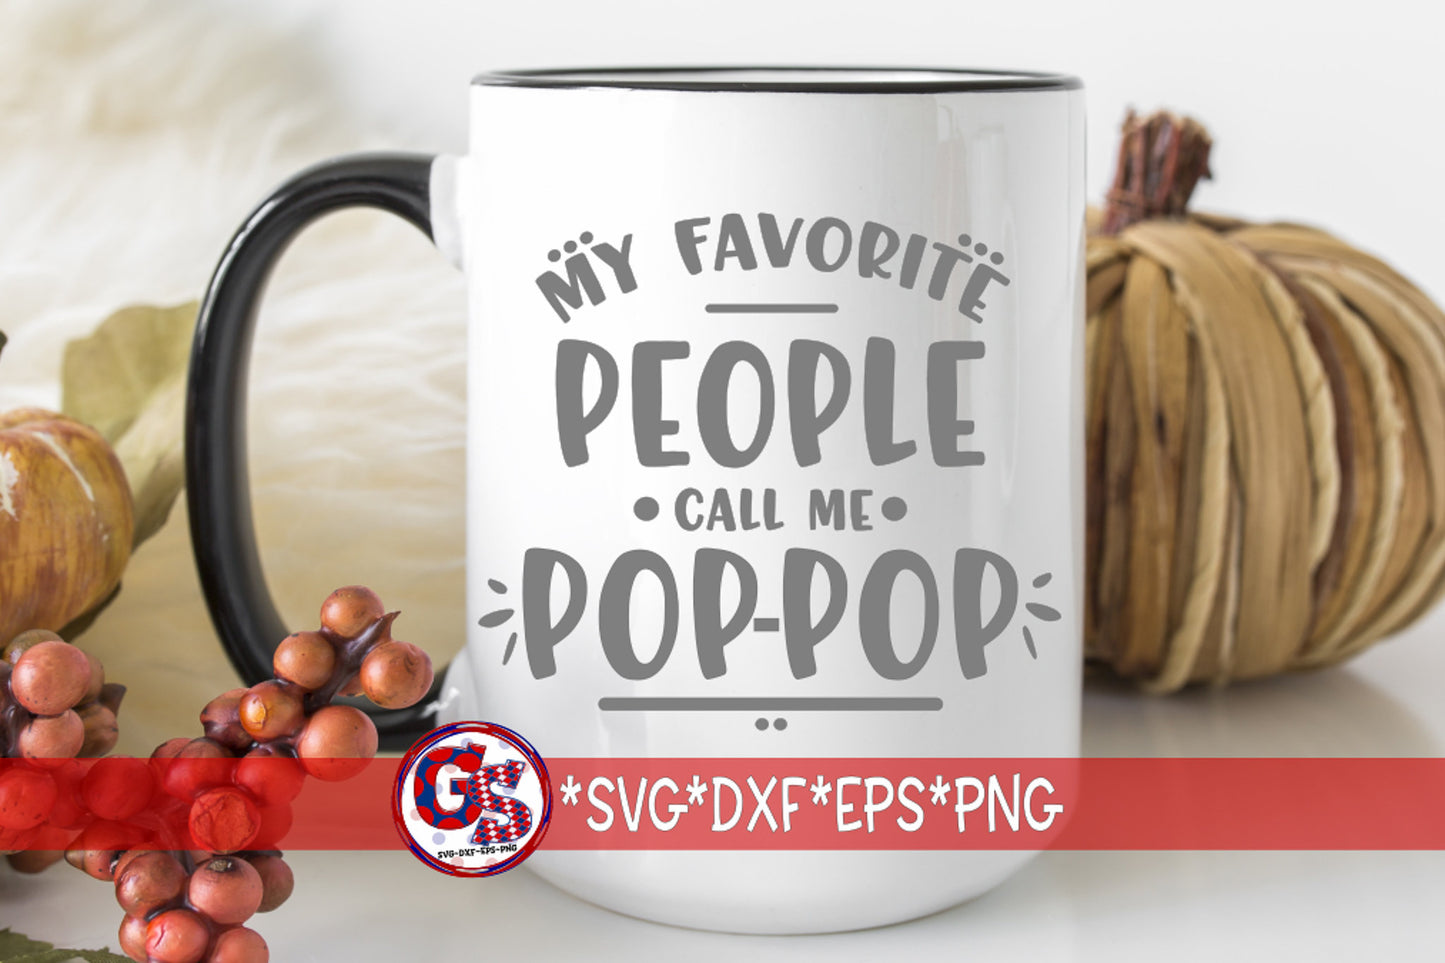 Father&#39;s Day SVG | My Favorite People Call Me Pop Pop SVG | Pop Pop svg, dxf eps png. Pop Pop | Father&#39;s Day SvG | Instant Download Cut File